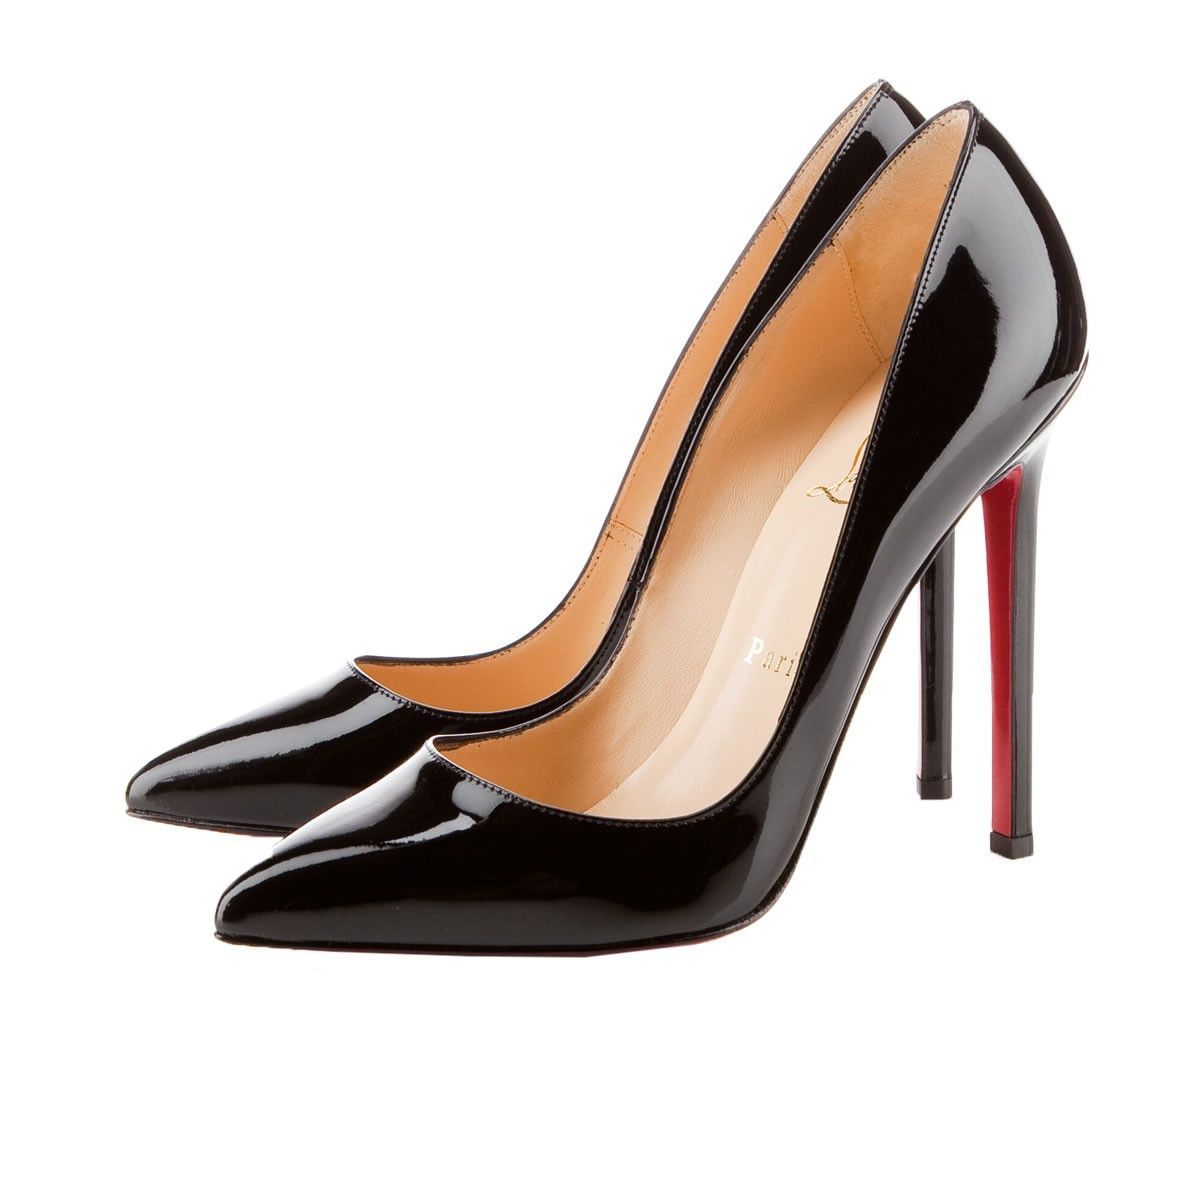 #CL #Louboutin A great way to style for fall